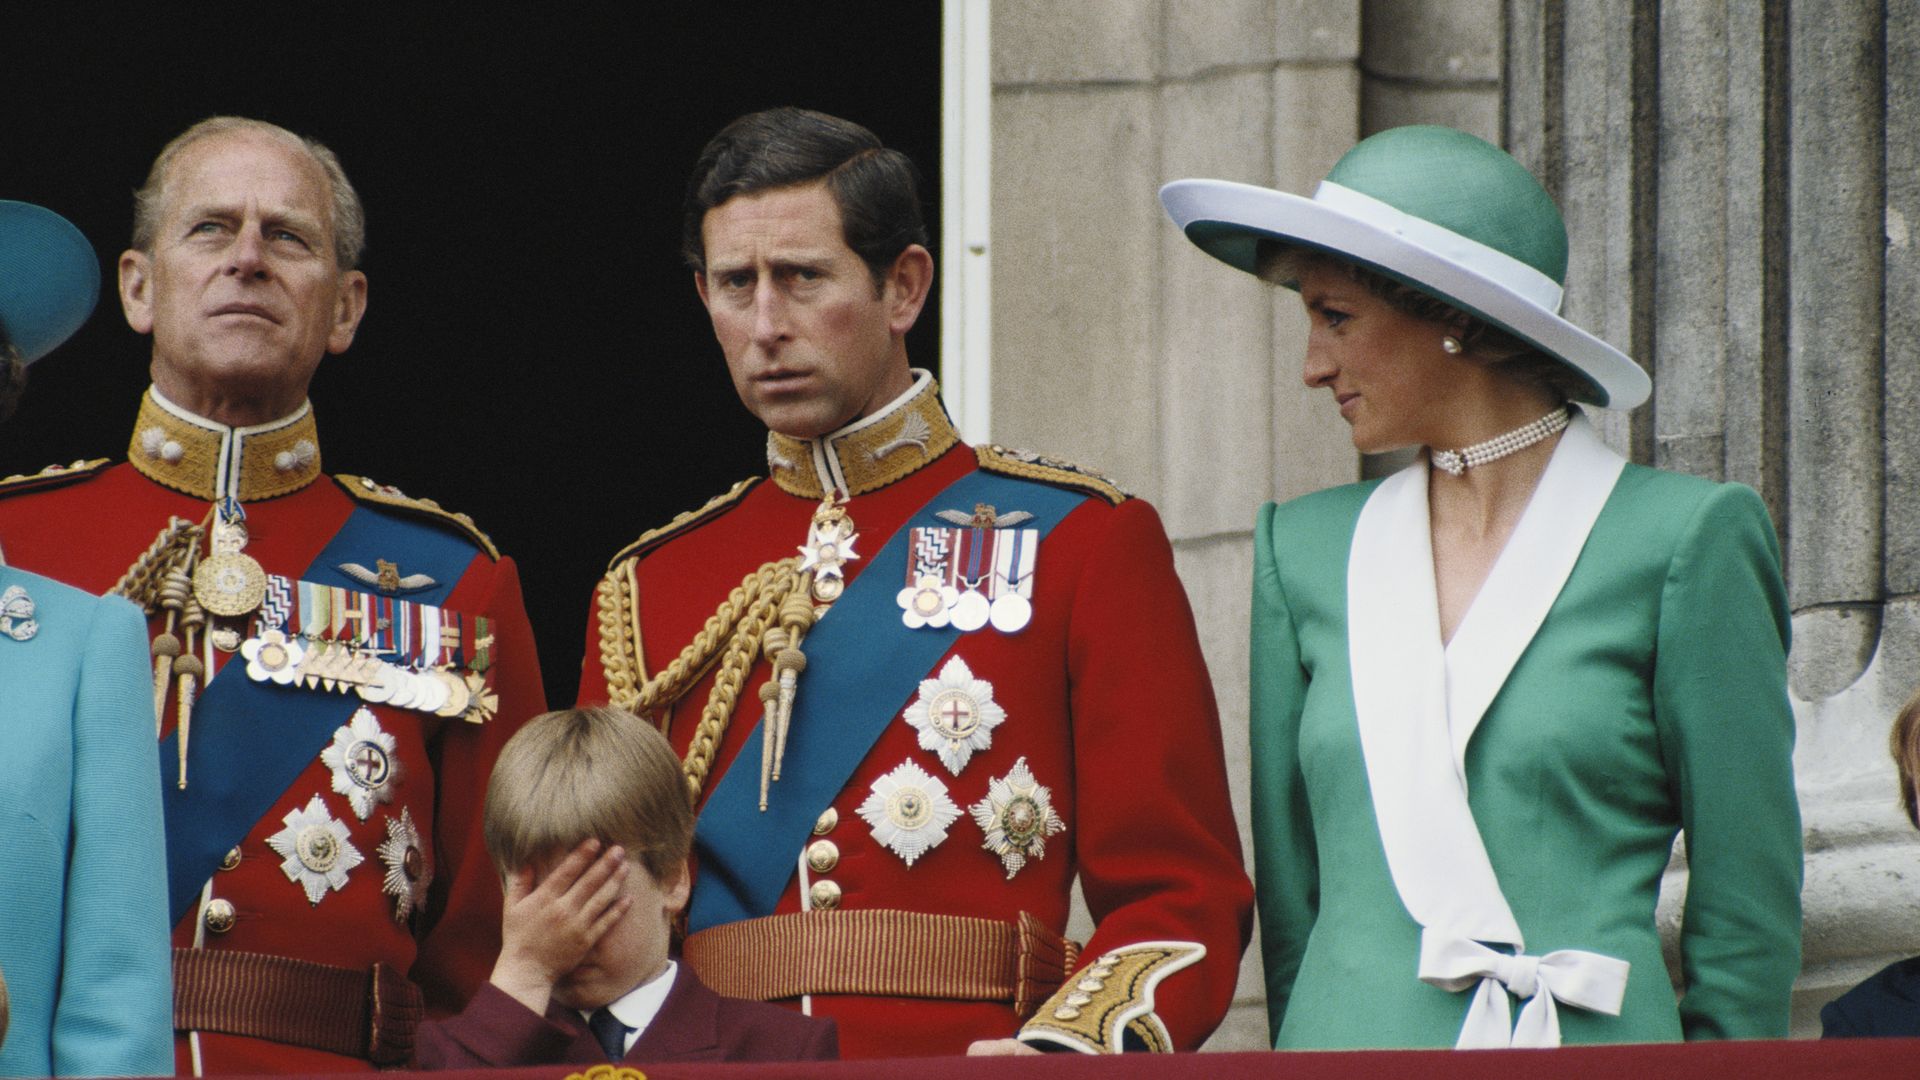 Prince William covering his face with Prince Philip, Prince Charles and Princess Diana standing behind him